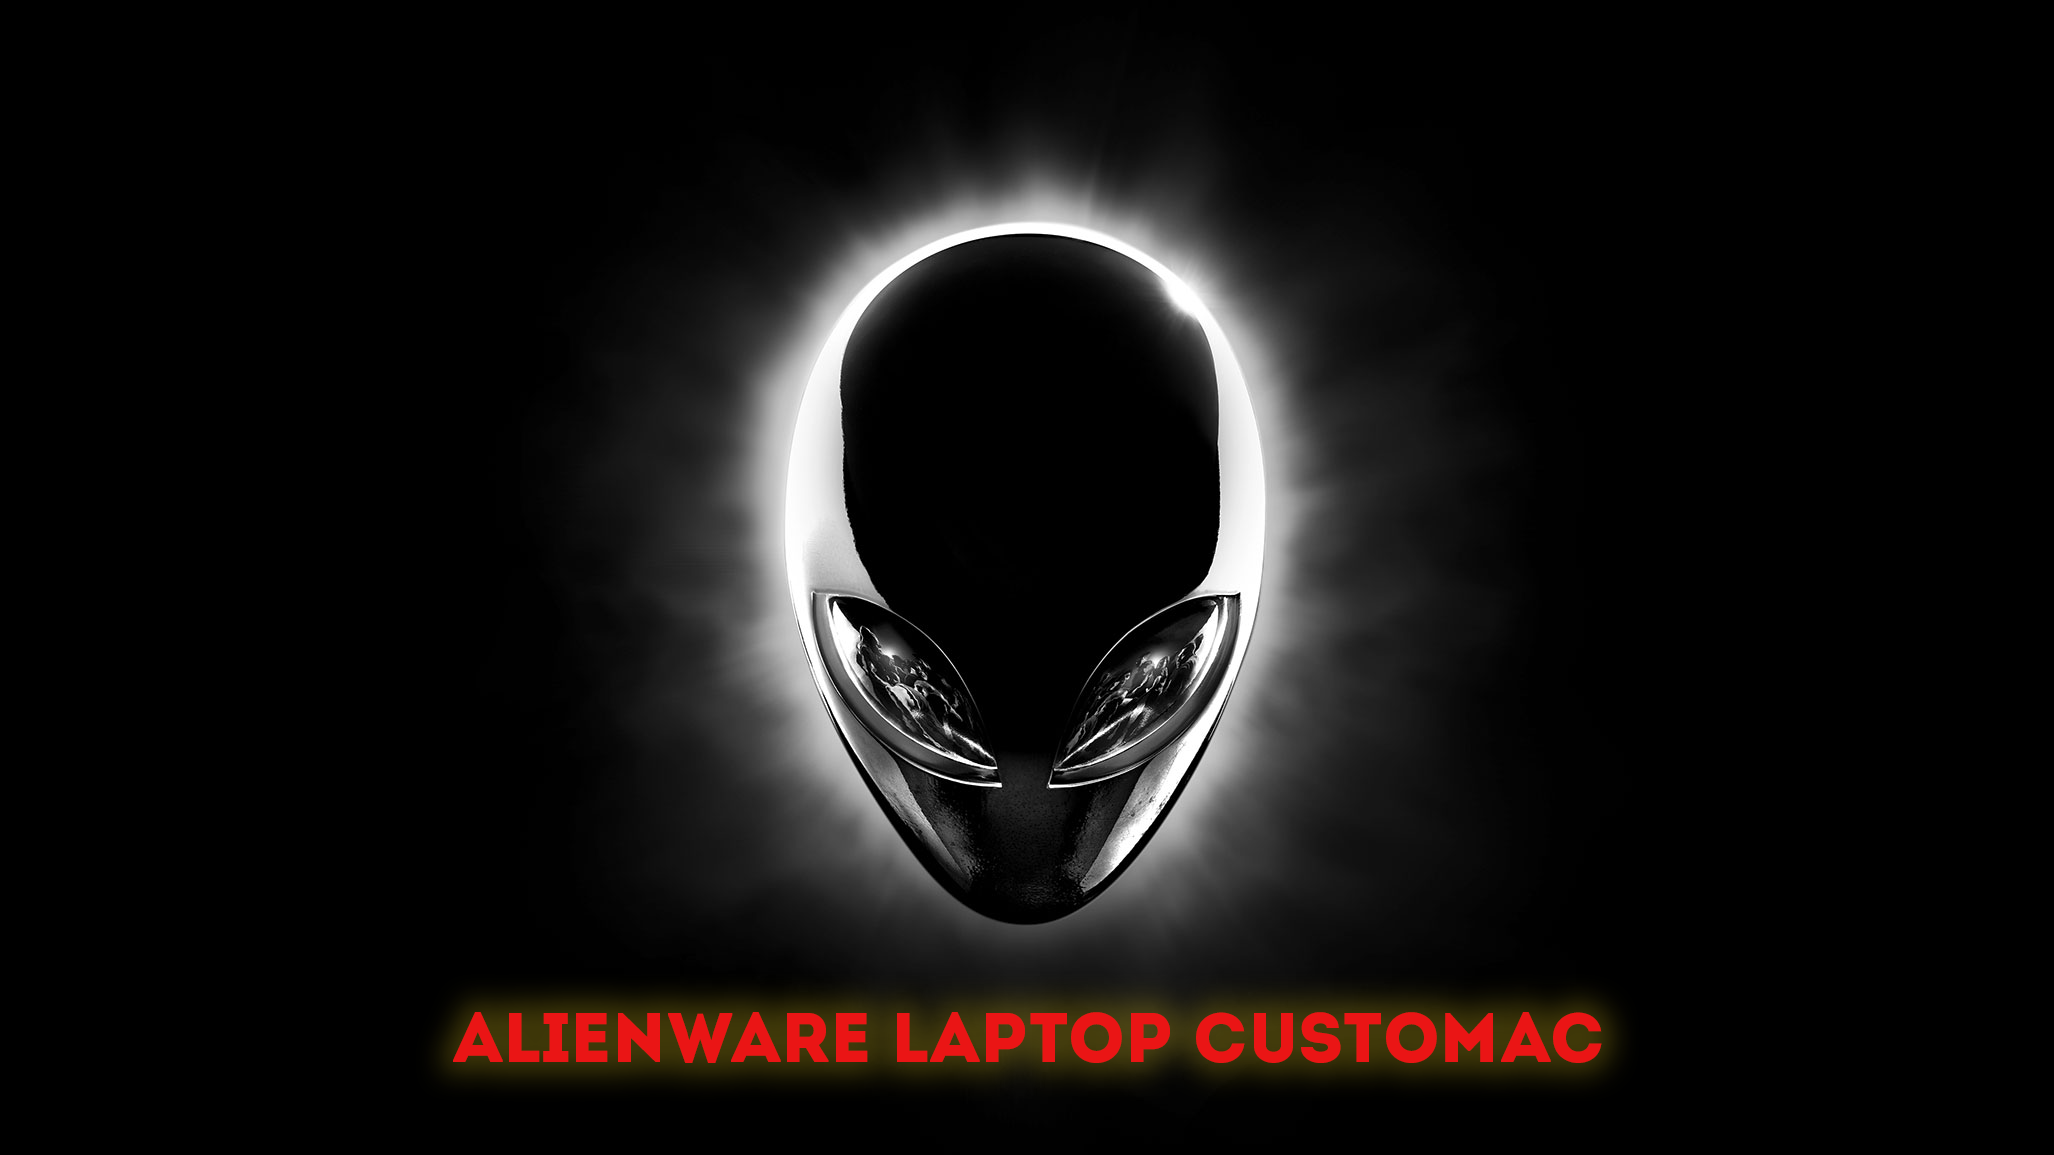 Product Review] Dell Alienware 15